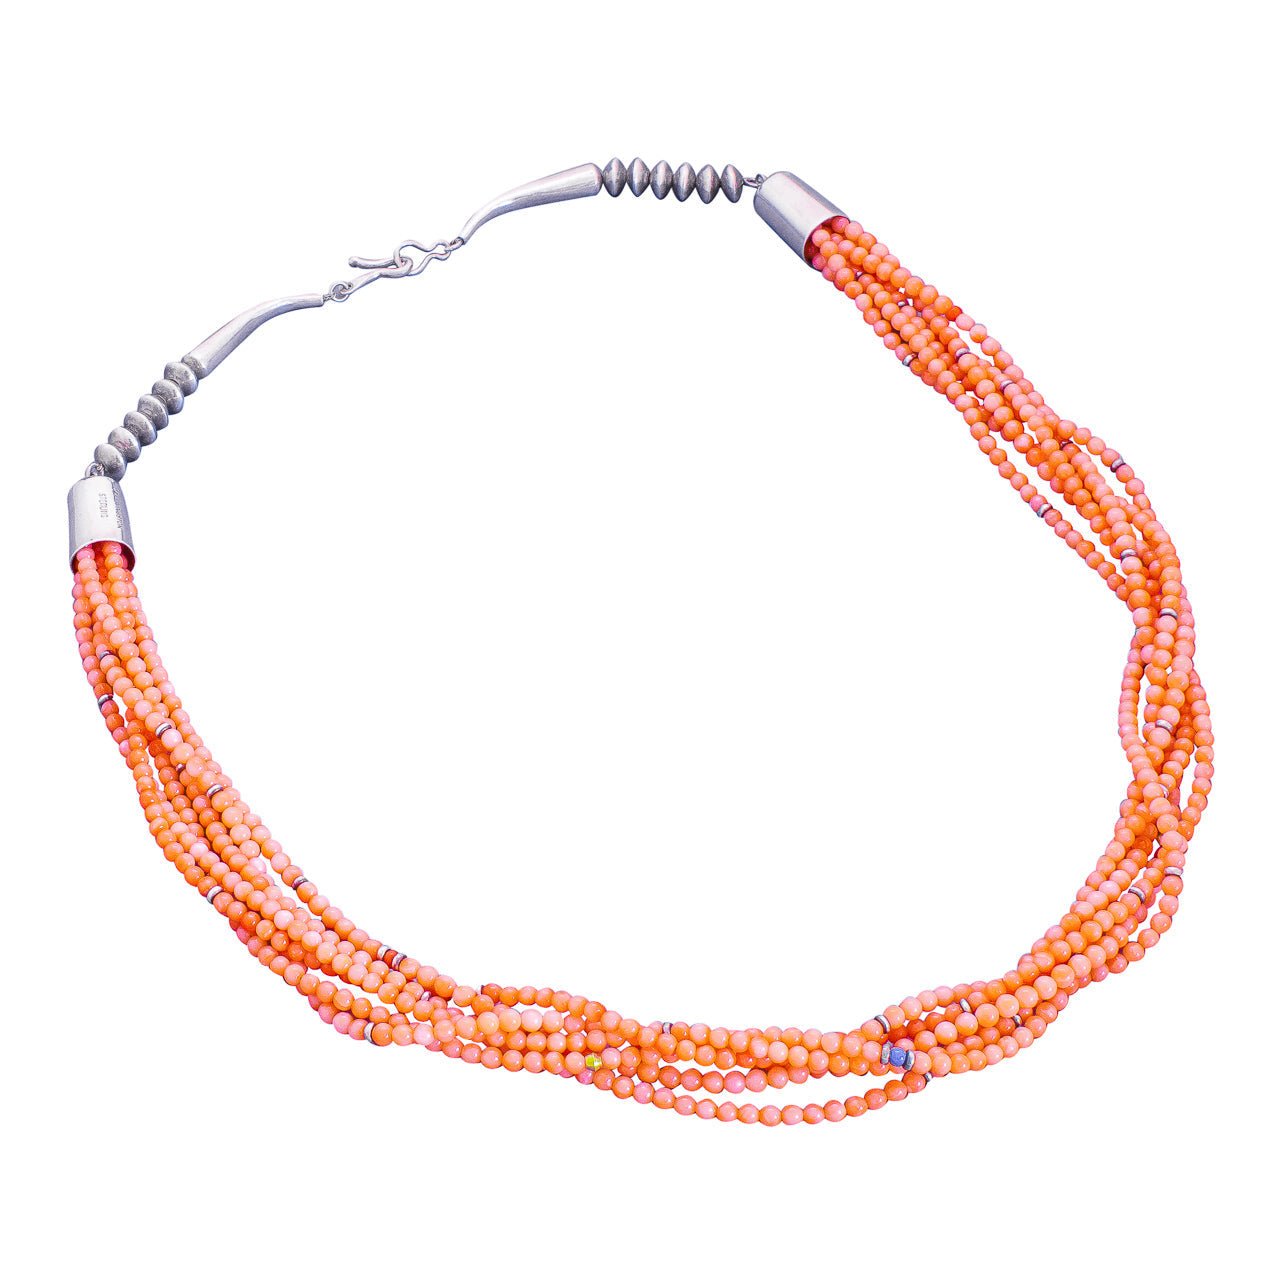 Contemporary Peach Coral Necklace By Jake & Irene Livingston - Turquoise & Tufa